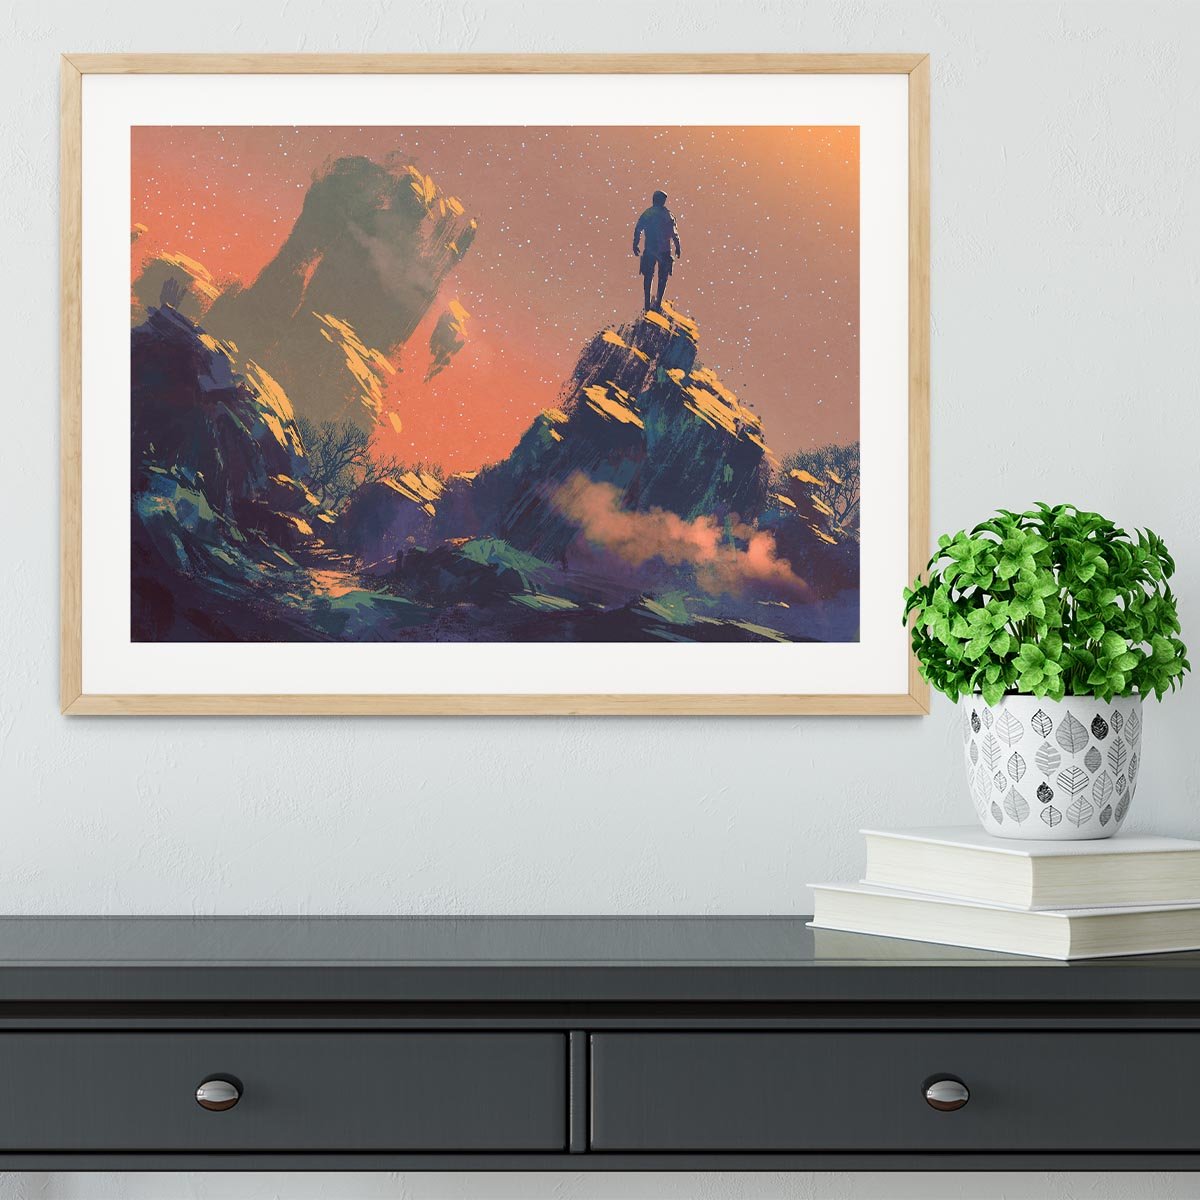 Top of the hill watching the stars Framed Print - Canvas Art Rocks - 3